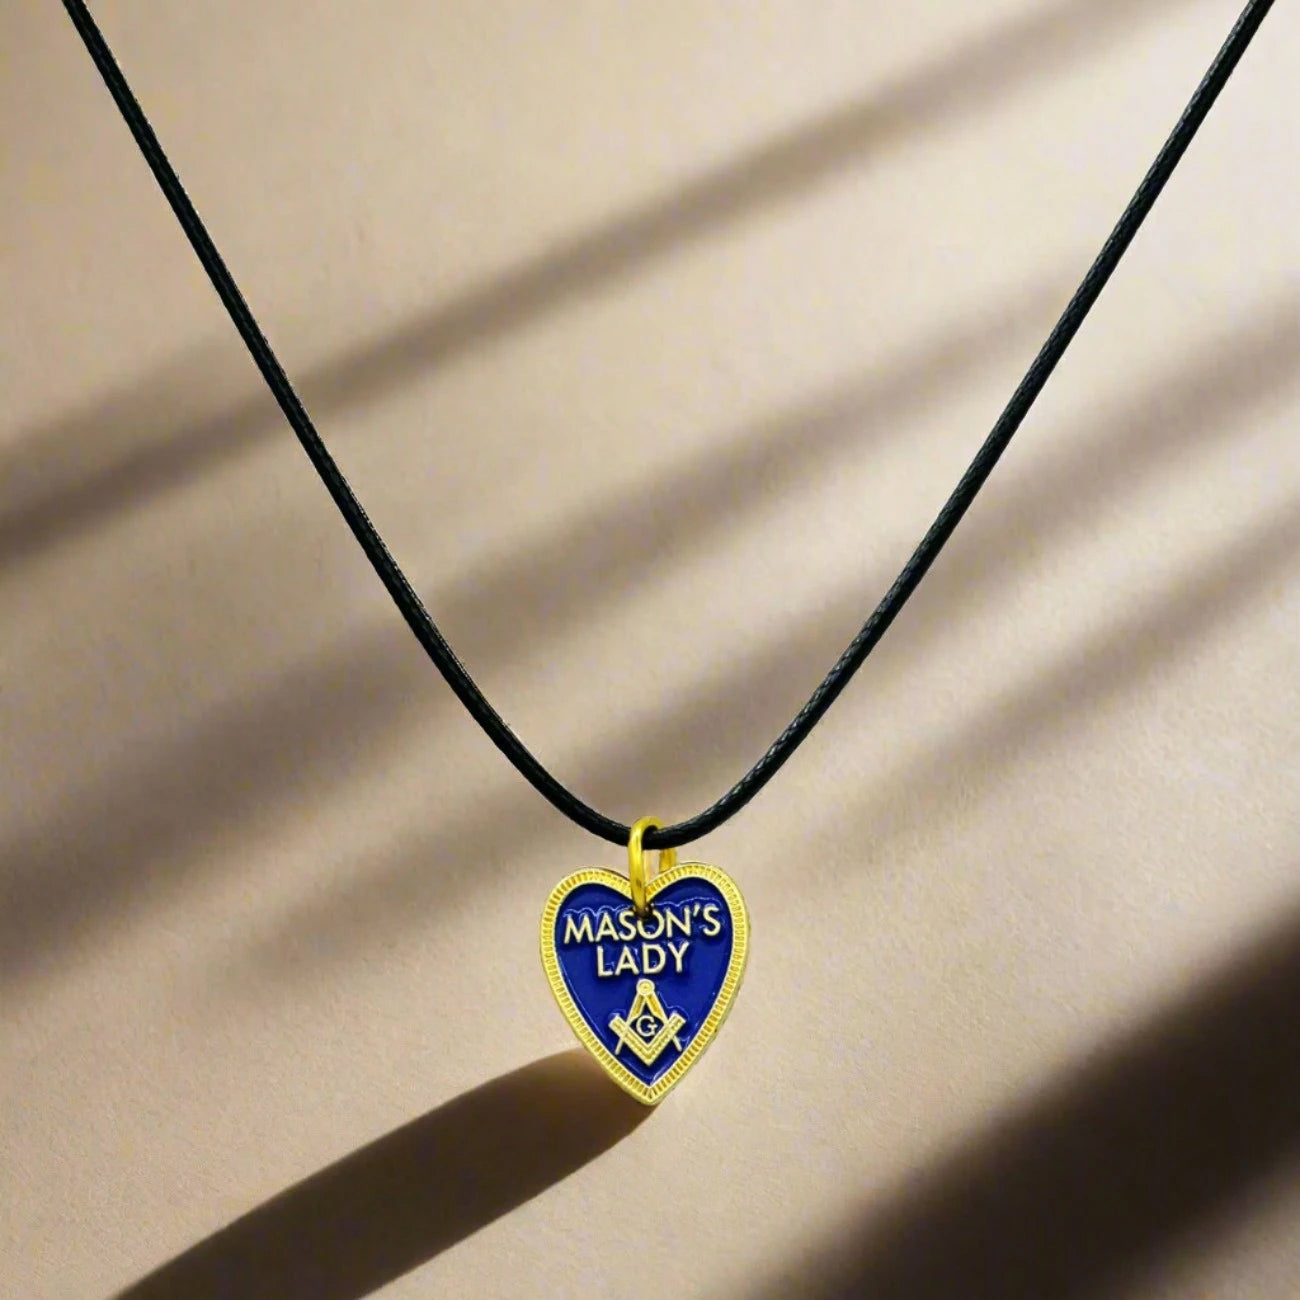 Master Mason Blue Lodge Necklace - Gold & Blue Plated MASON'S LADY Square and Compass G With Leather Chain